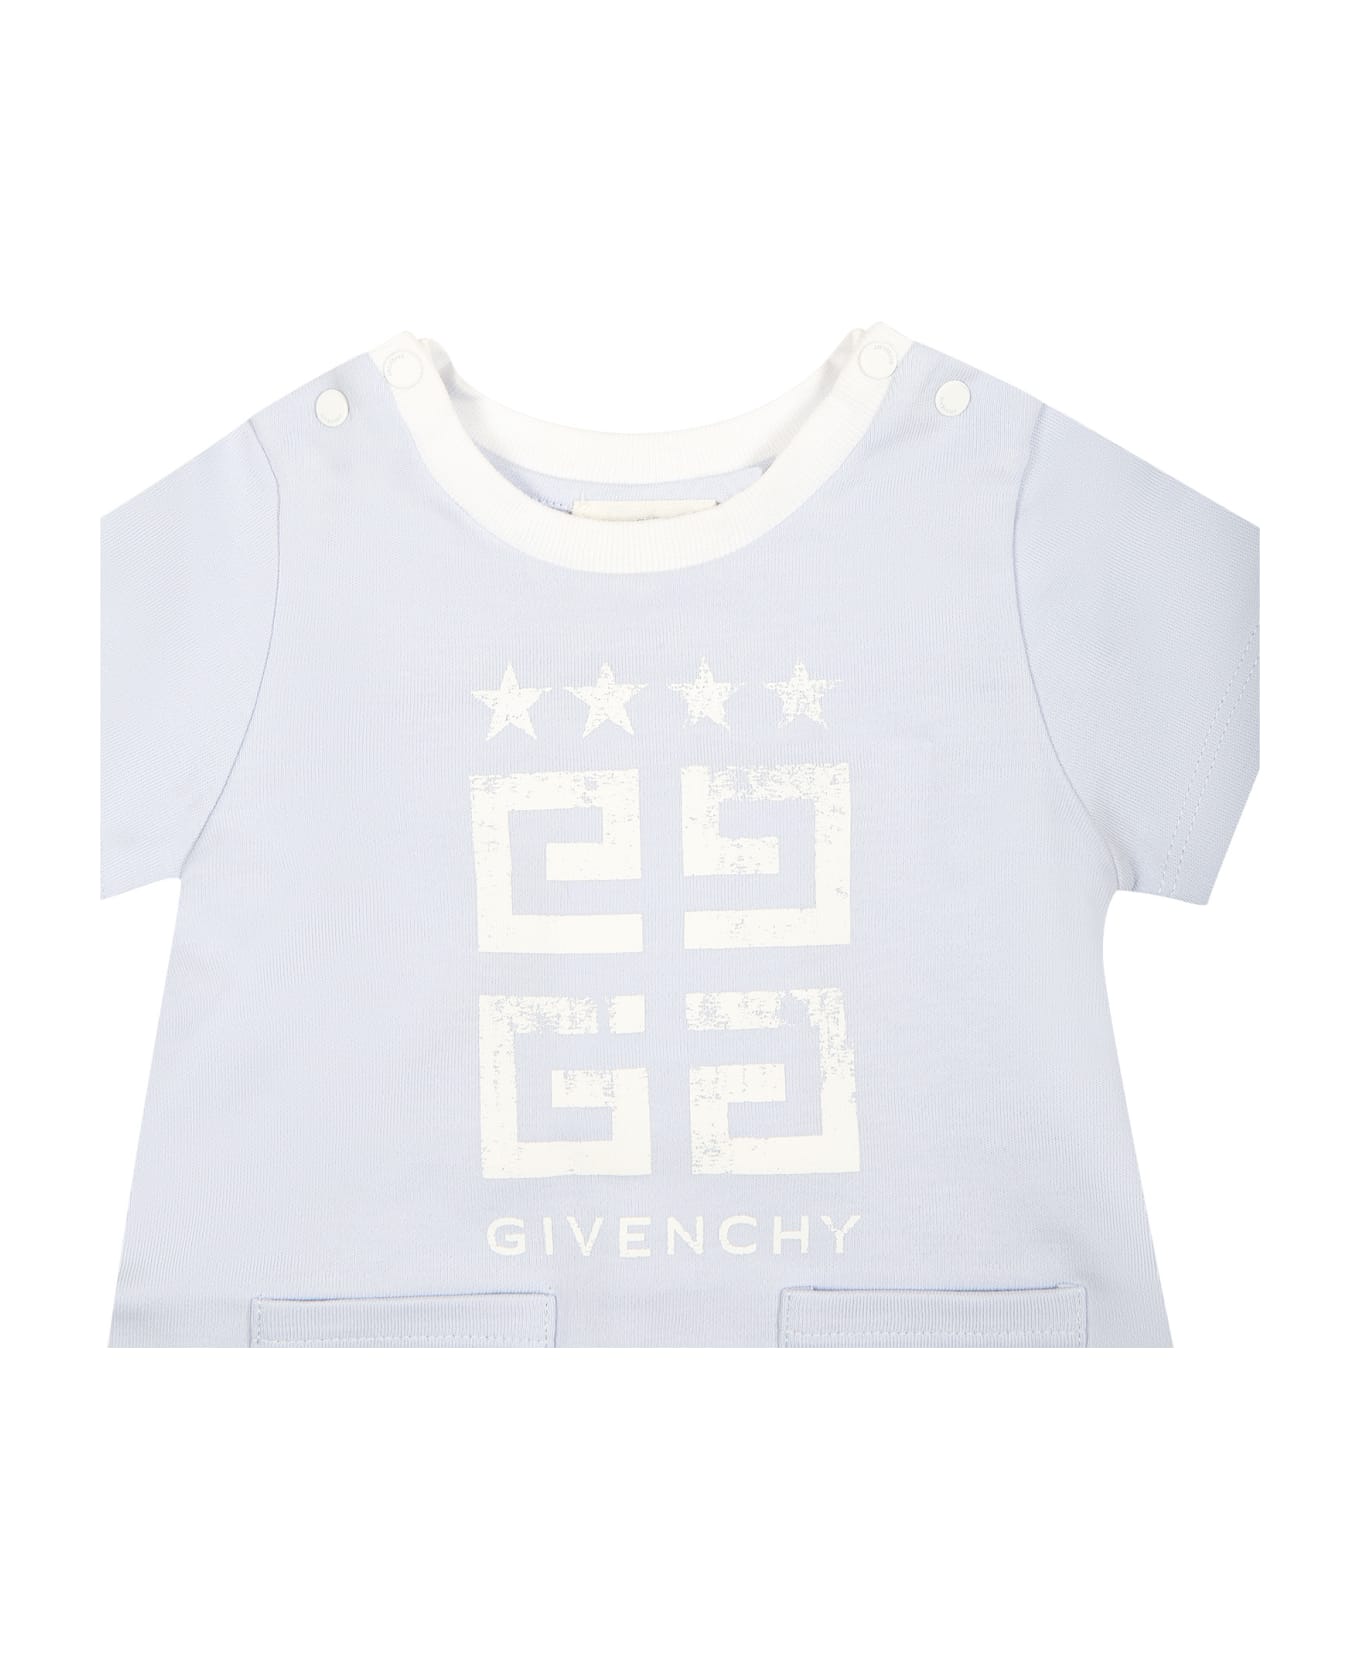 Givenchy Light Blue Romper For Baby Boy With Logo - Light Blue